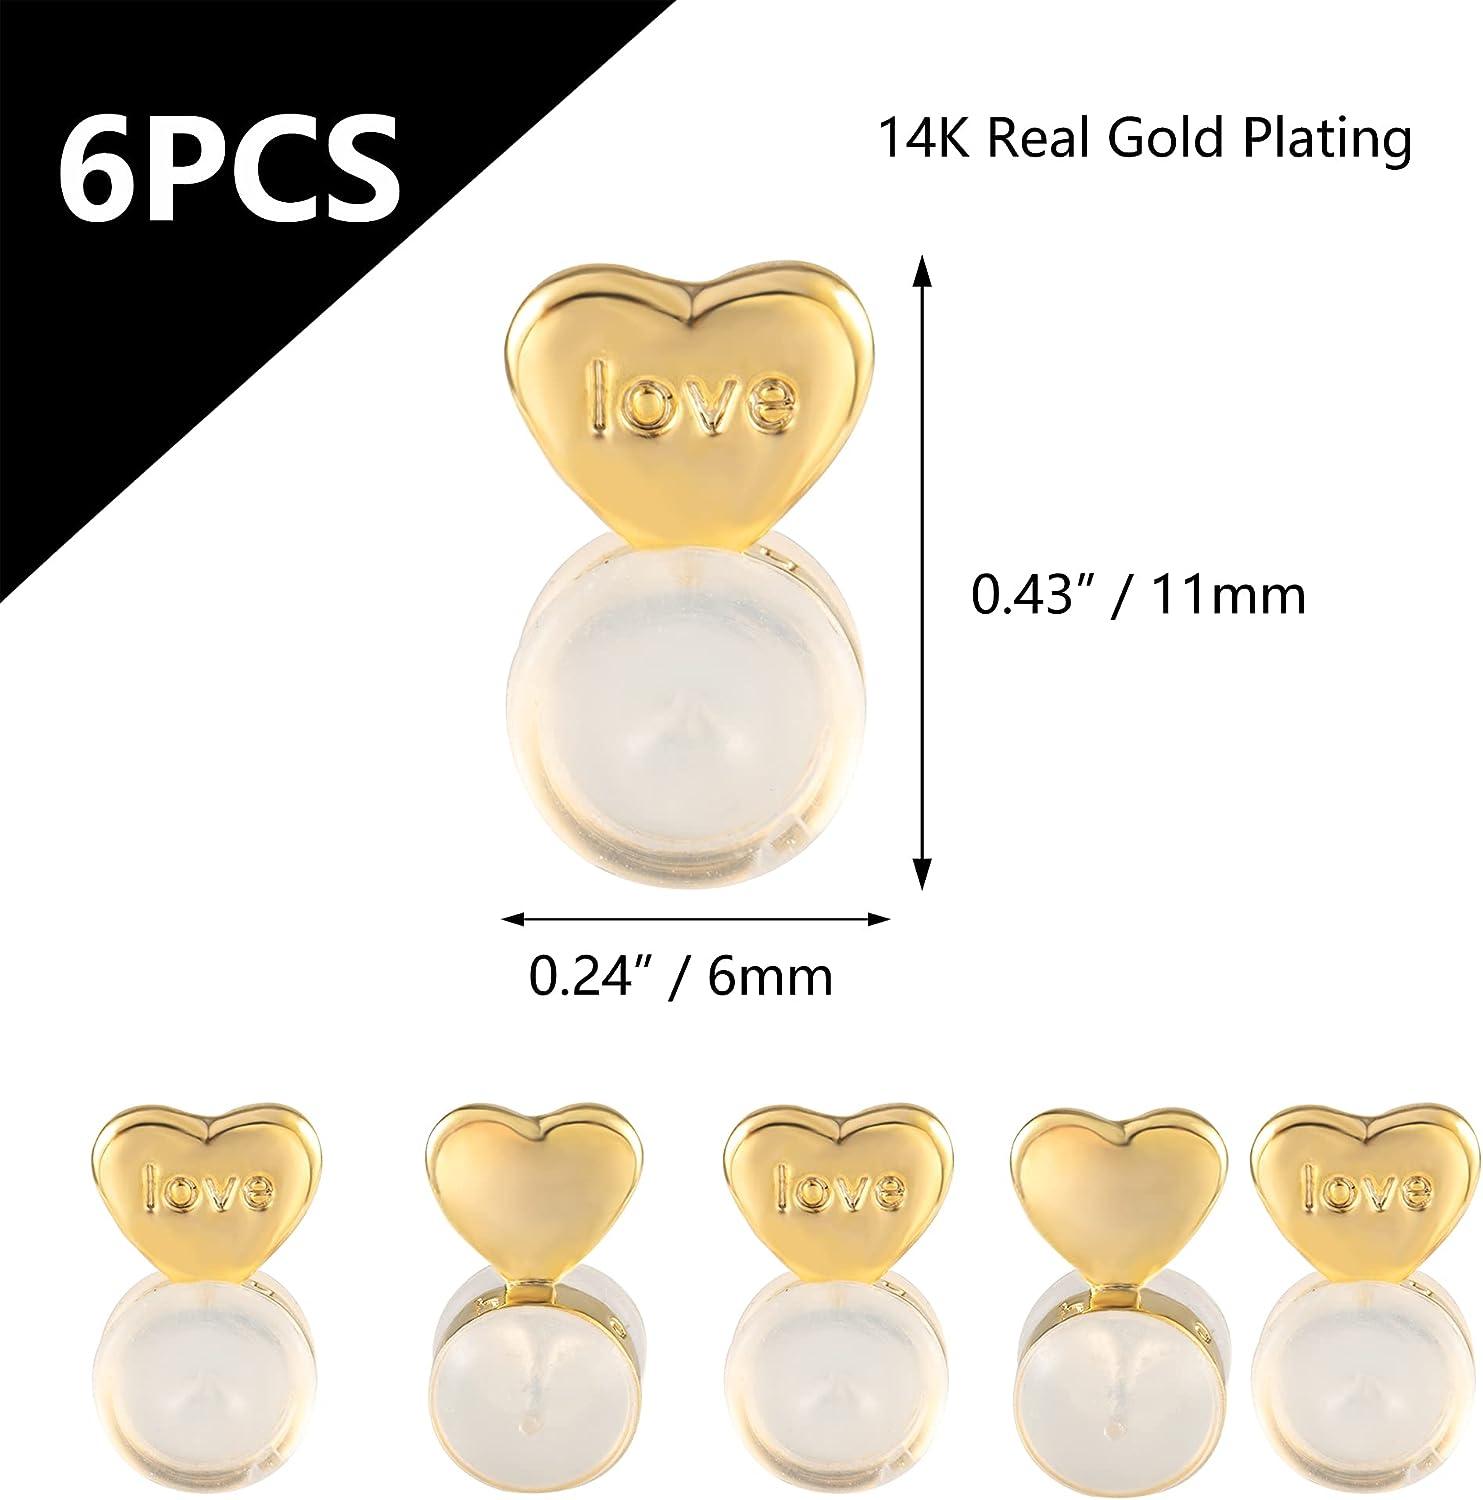 6PCS Heart Silicone Earring Lifter, 14K Gold Plated Love Earring Backs for  Studs/Droopy Ears, Hypoallergenic Secure Earring Backs Replacements for  Heavy Earrings